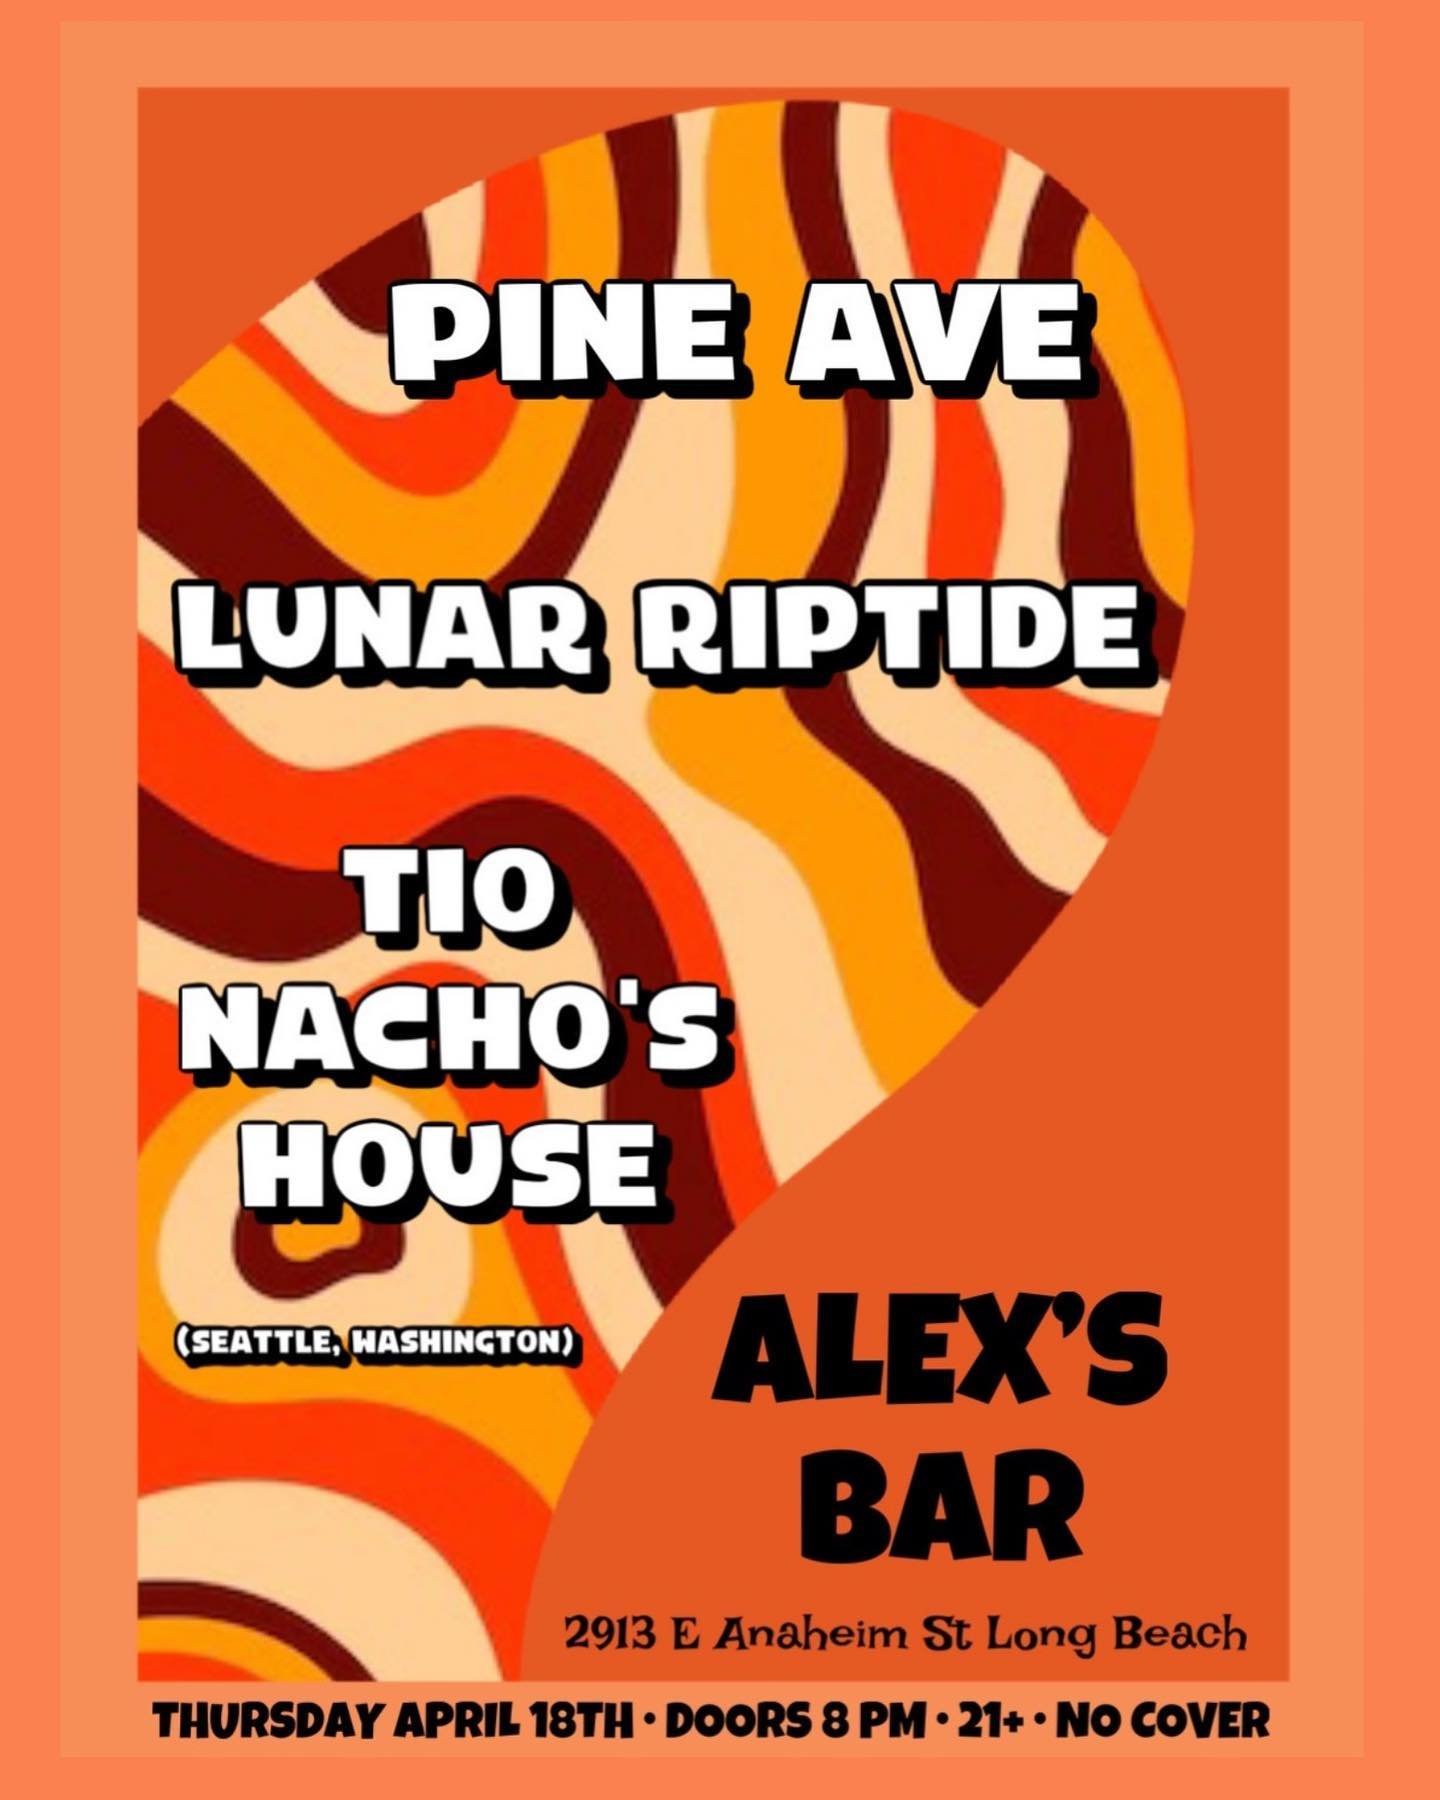 Long Beach, California tonight! Come see us in the LBC with @pineaveofficial and @lunarriptideband at @alexsbarlbc tonight! 5/18 @ 8pm, 21+, no cover.